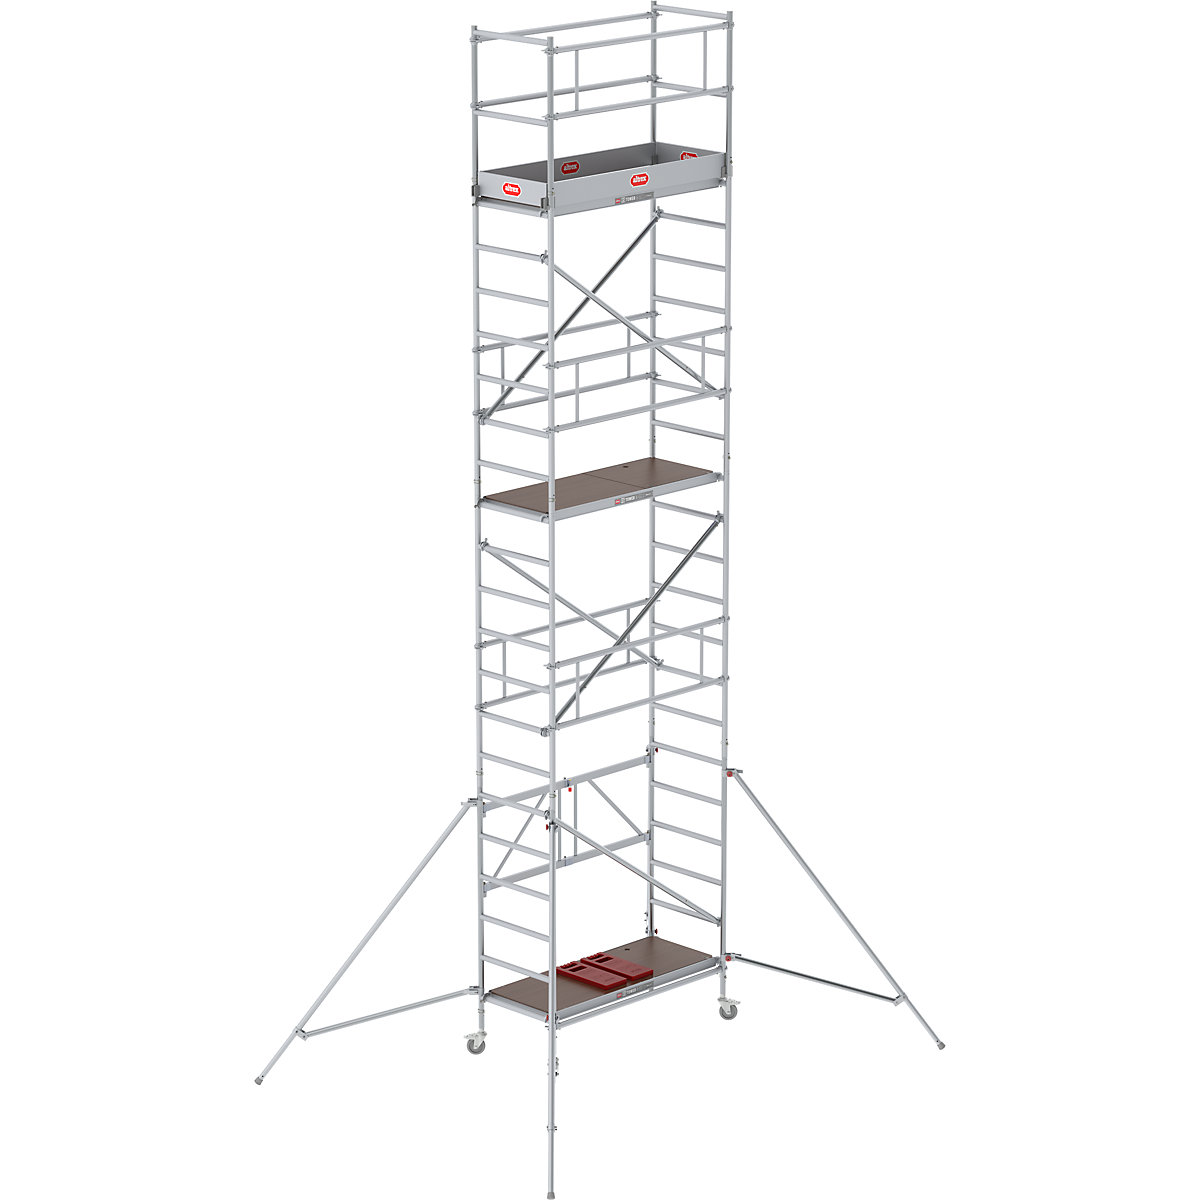 RS TOWER 34 folding tower – Altrex